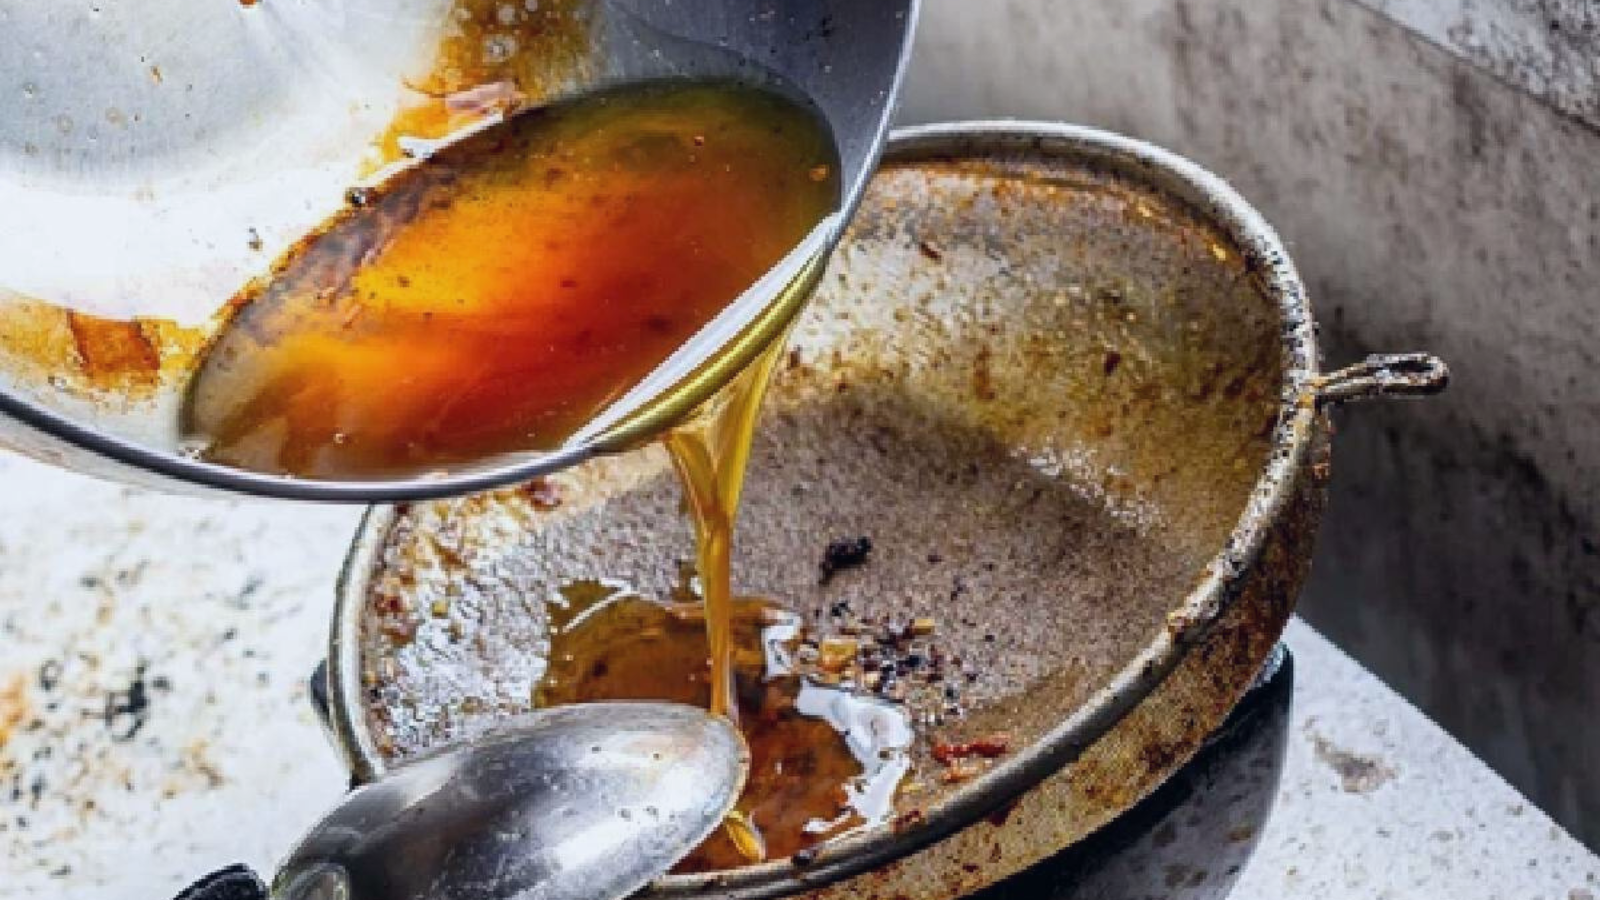 Proper Disposal of Grease and Oil in Your Kitchen: Why It Matters - Halo  Plumbing